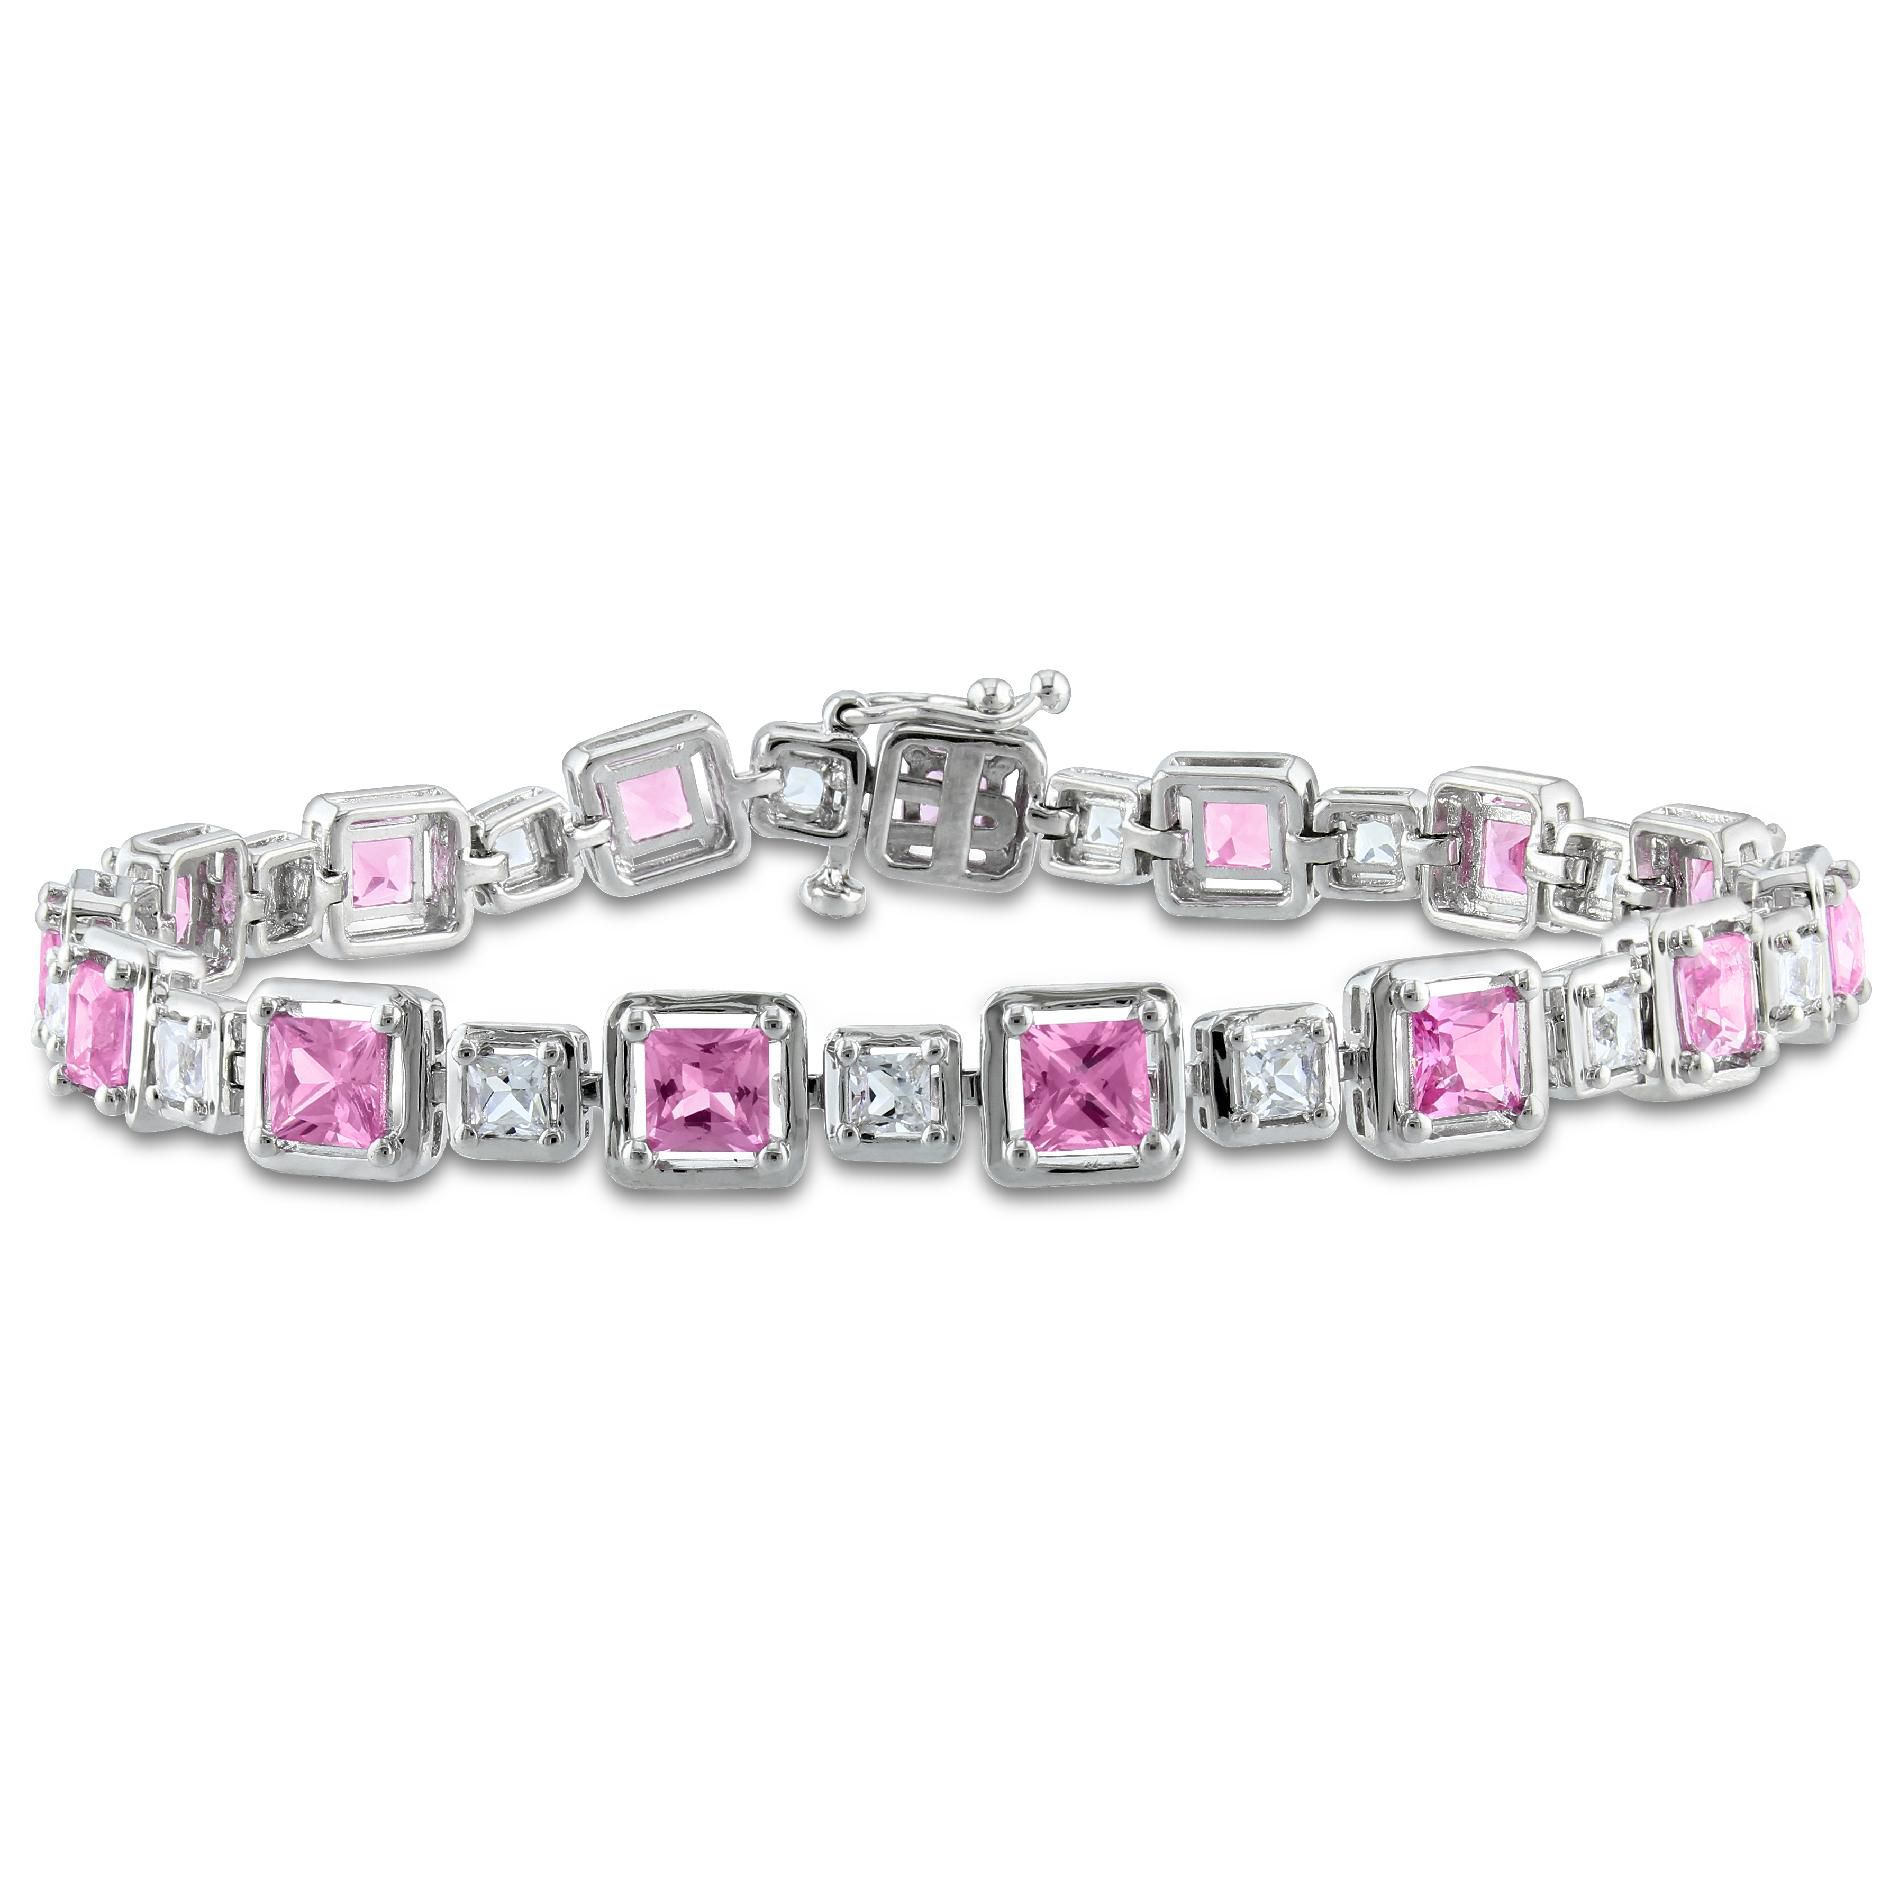 7 1/2 CT TGW Created White and Pink Sapphire Sterling Silver Bracelet  7"